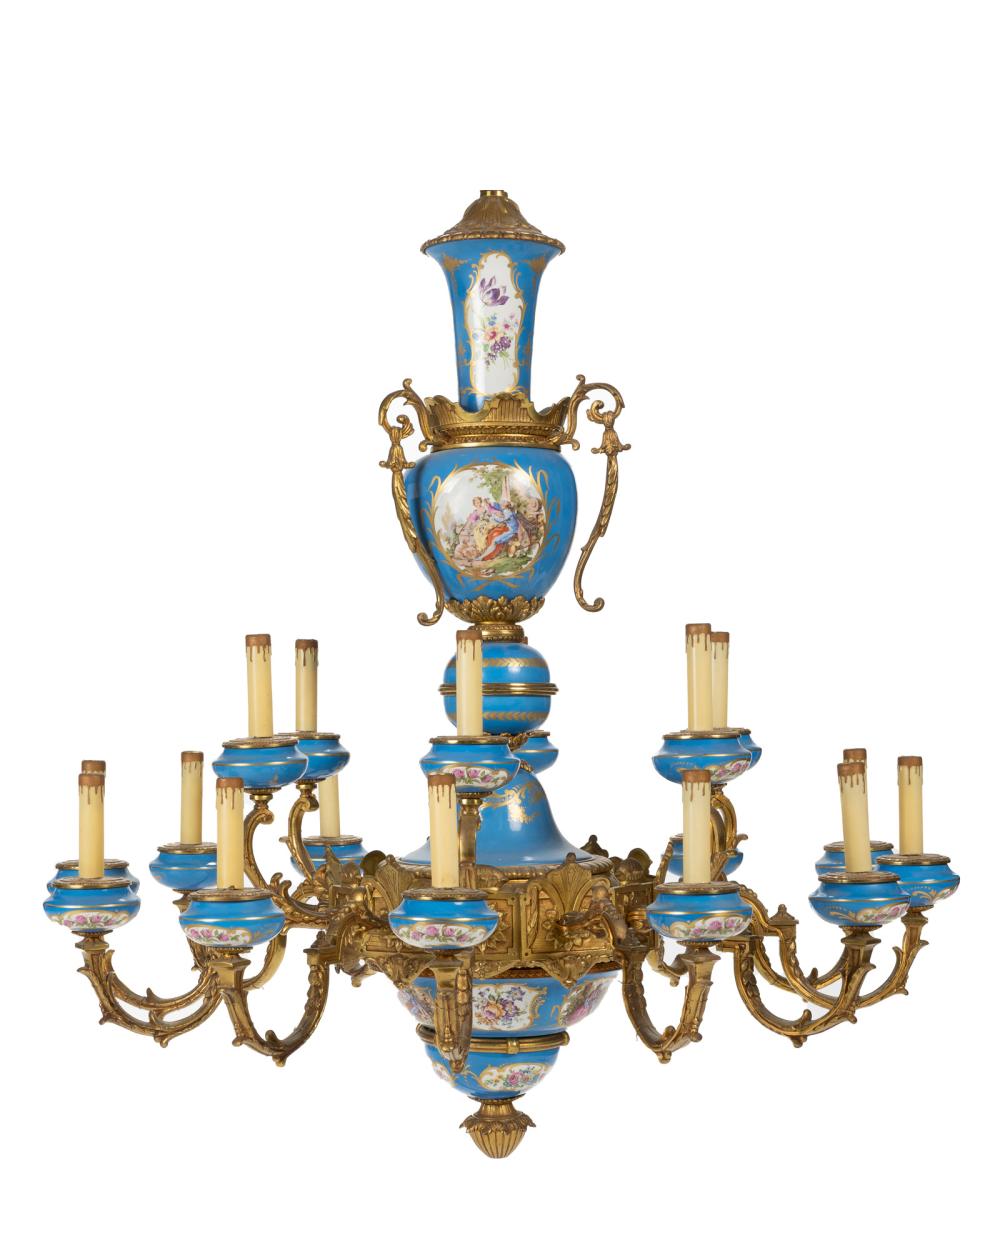 A SèVRES-STYLE GILT-BRONZE AND